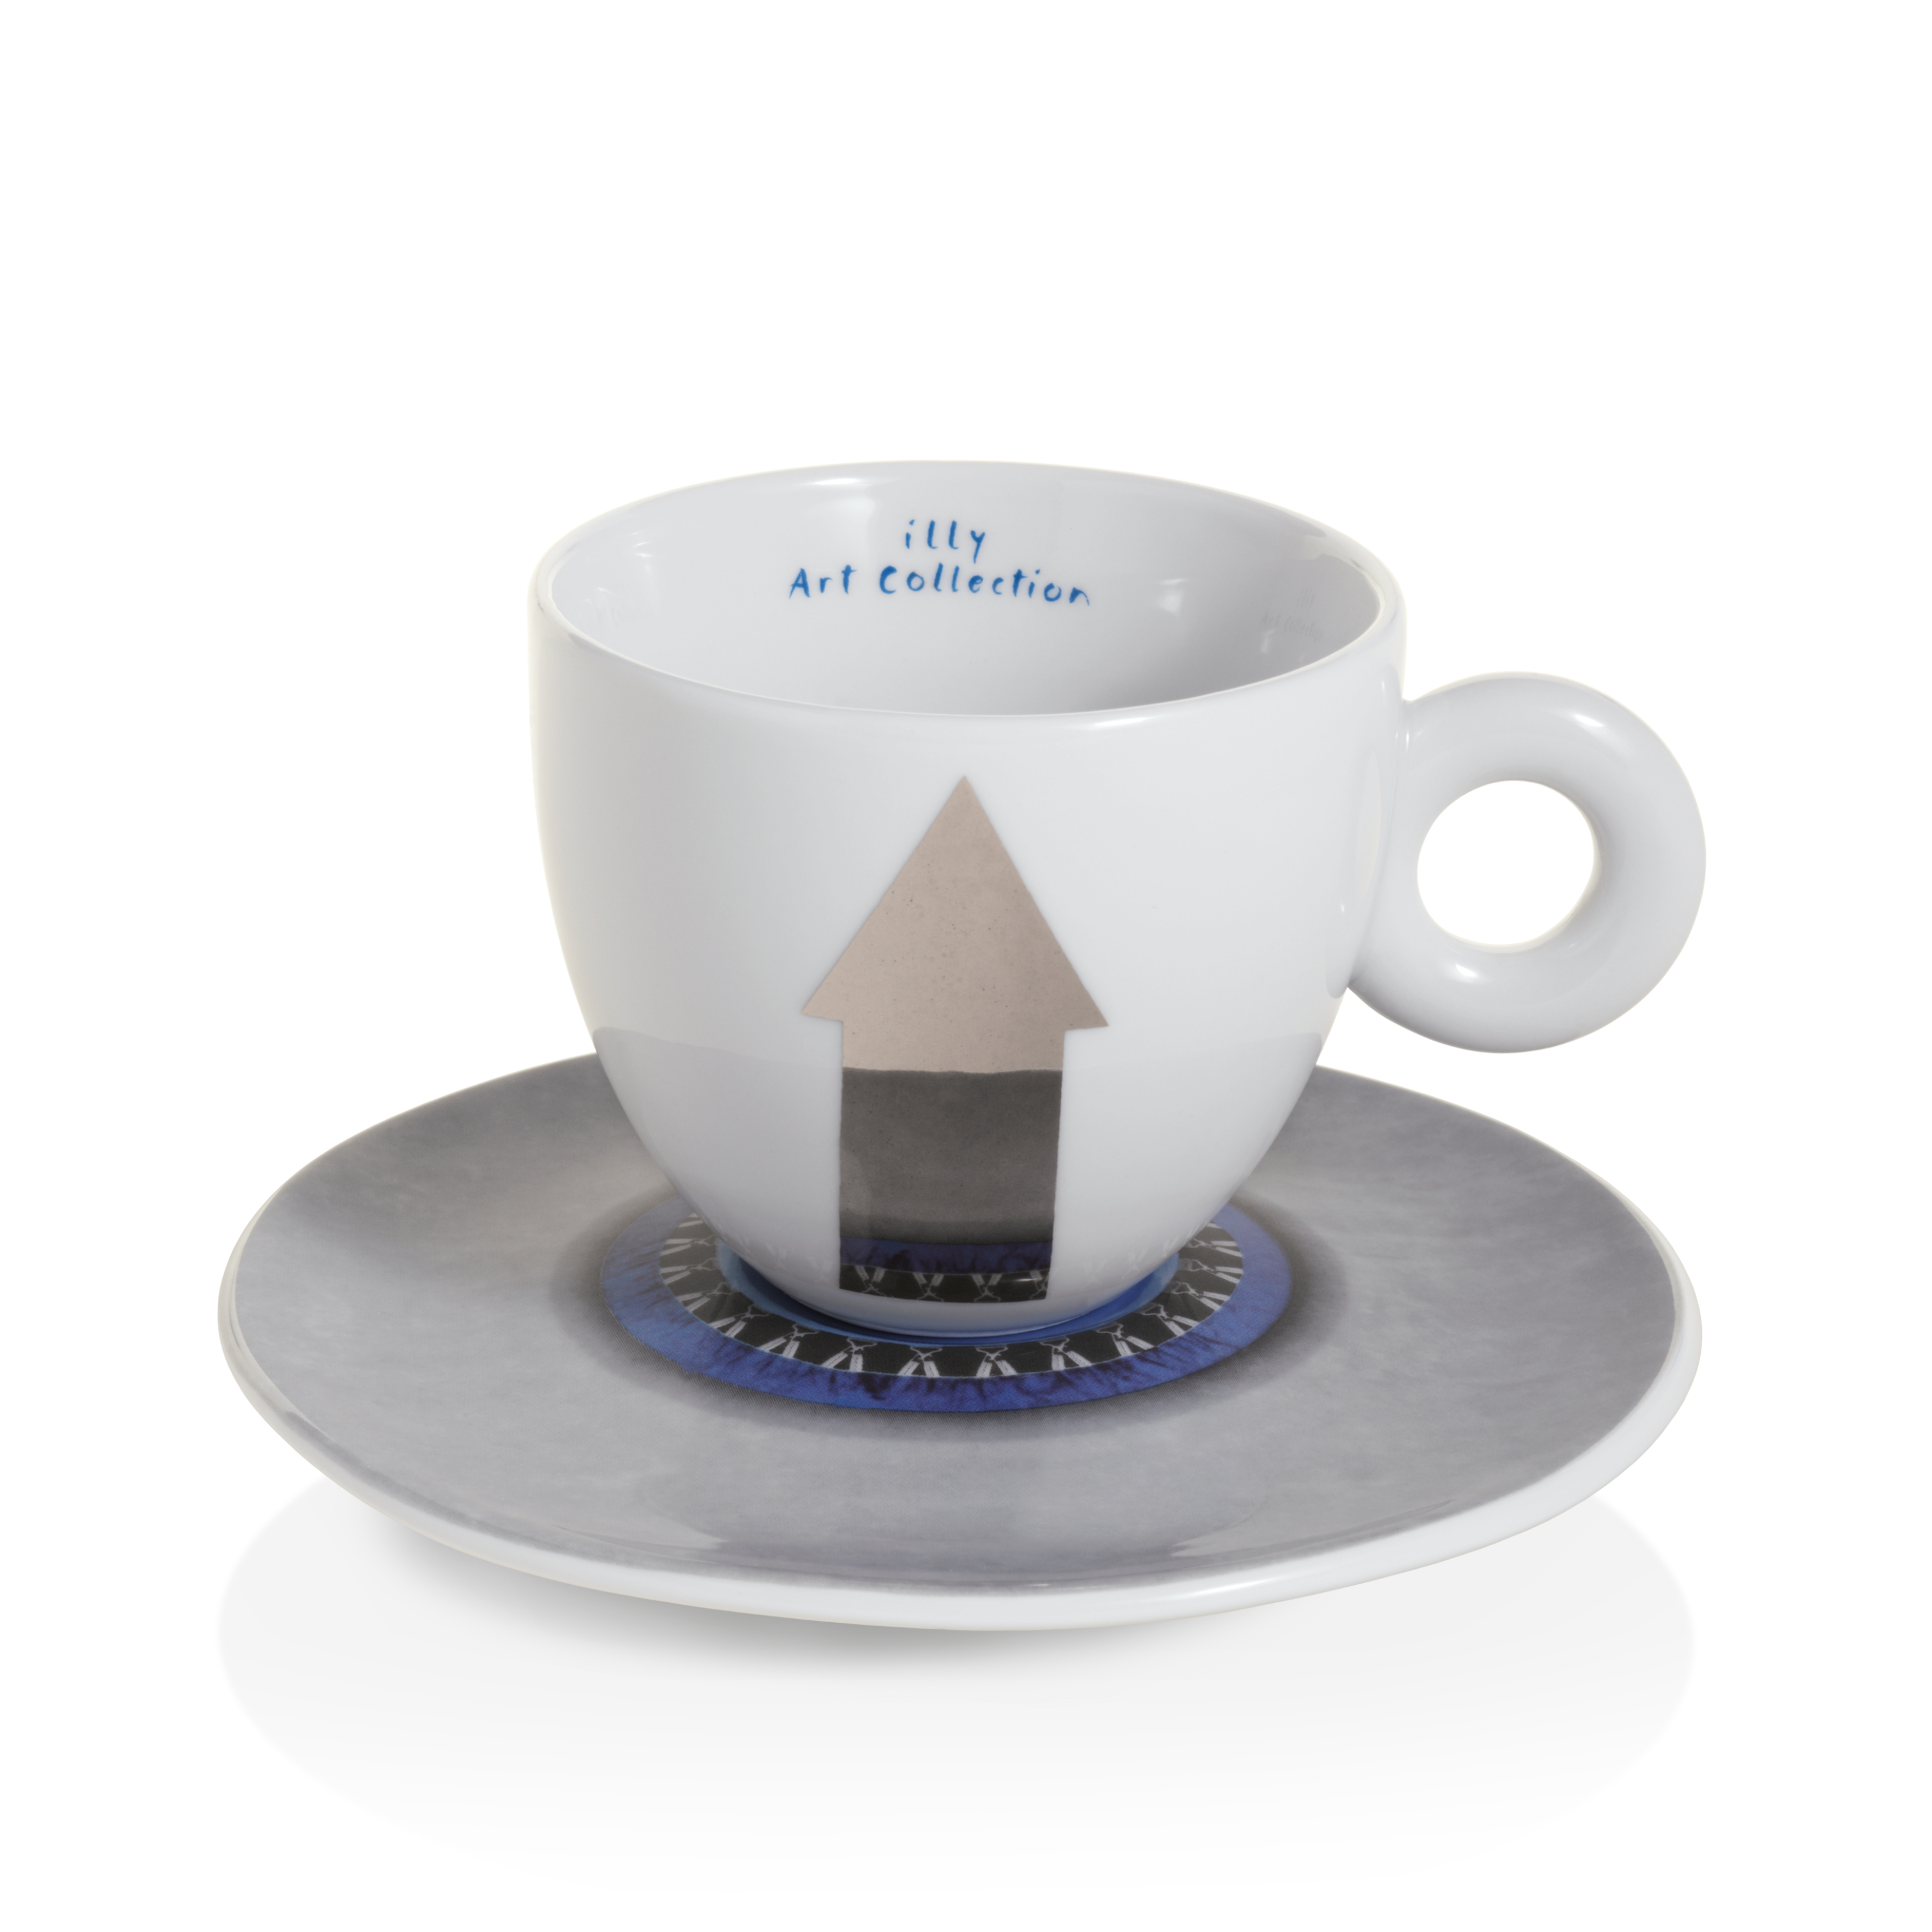 illy Art Collection ΒΙΕΝΝΑLE 2022 Gift 2 Cappuccino Cups | SASAMOTO & CENCI, Cups, 02-02-6085